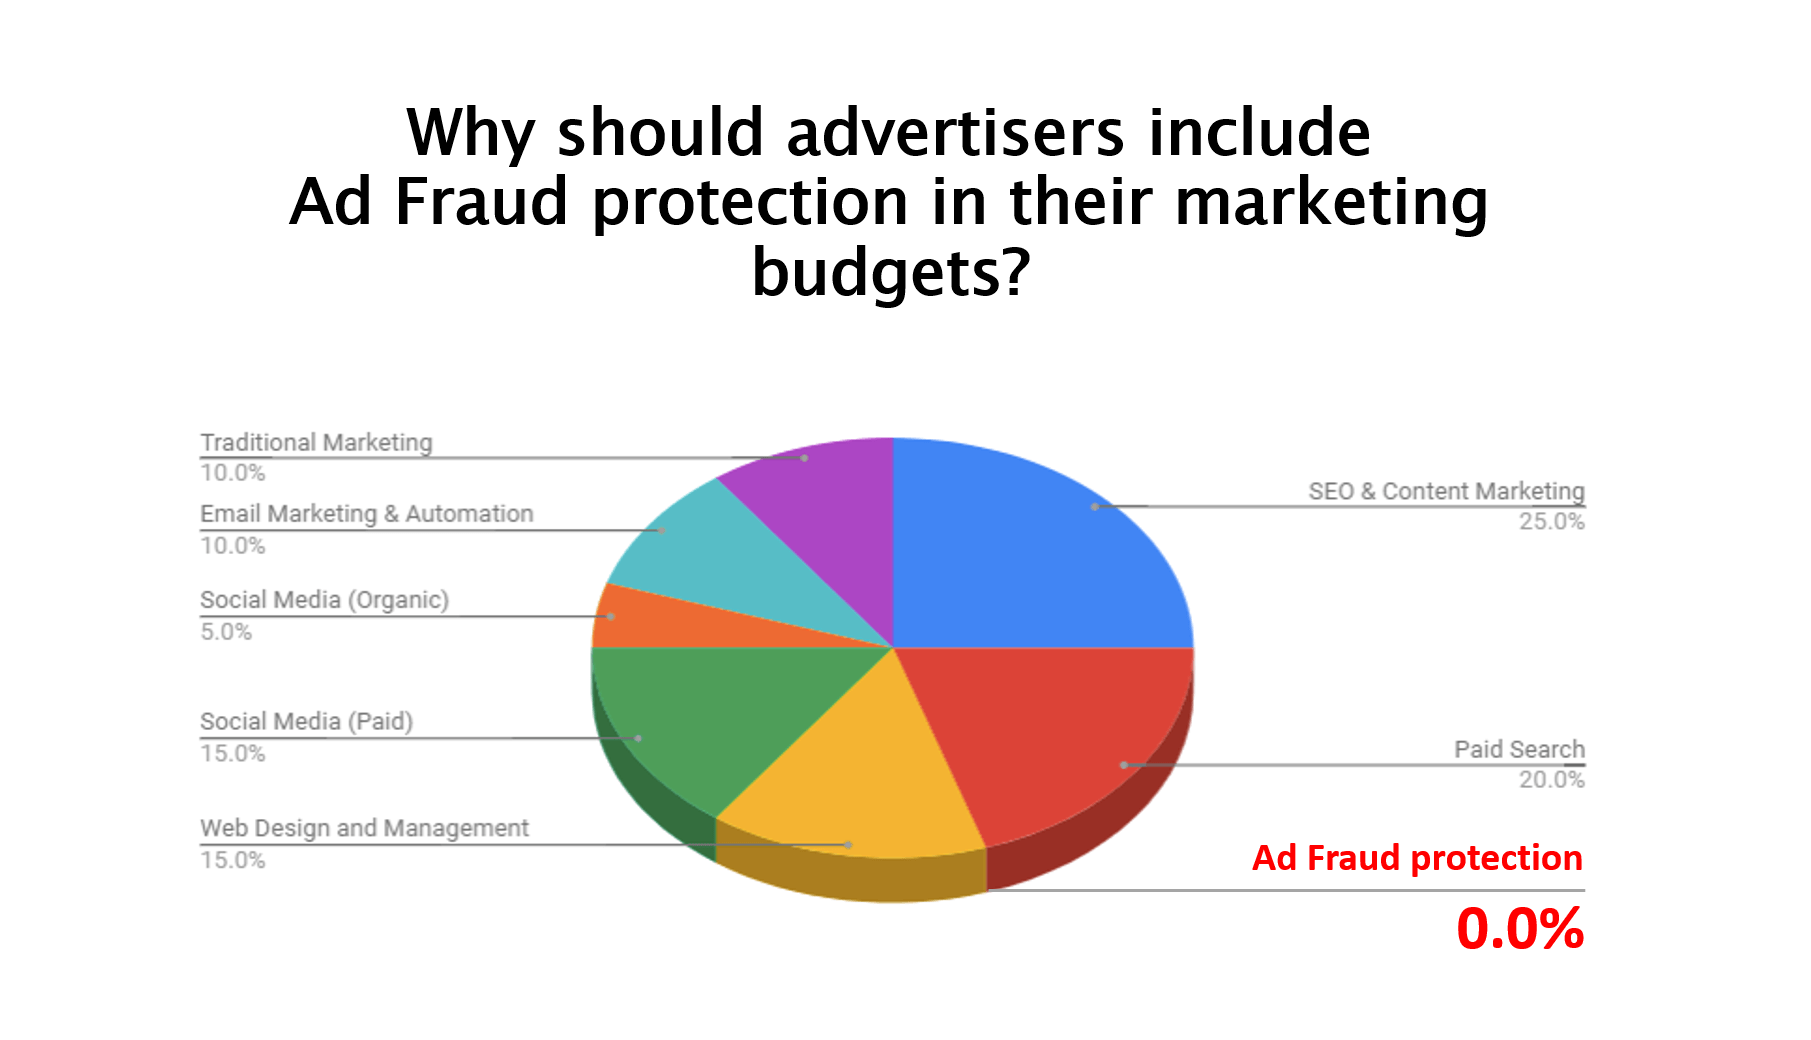 Why should advertisers include Ad Fraud protection in their marketing budgets?